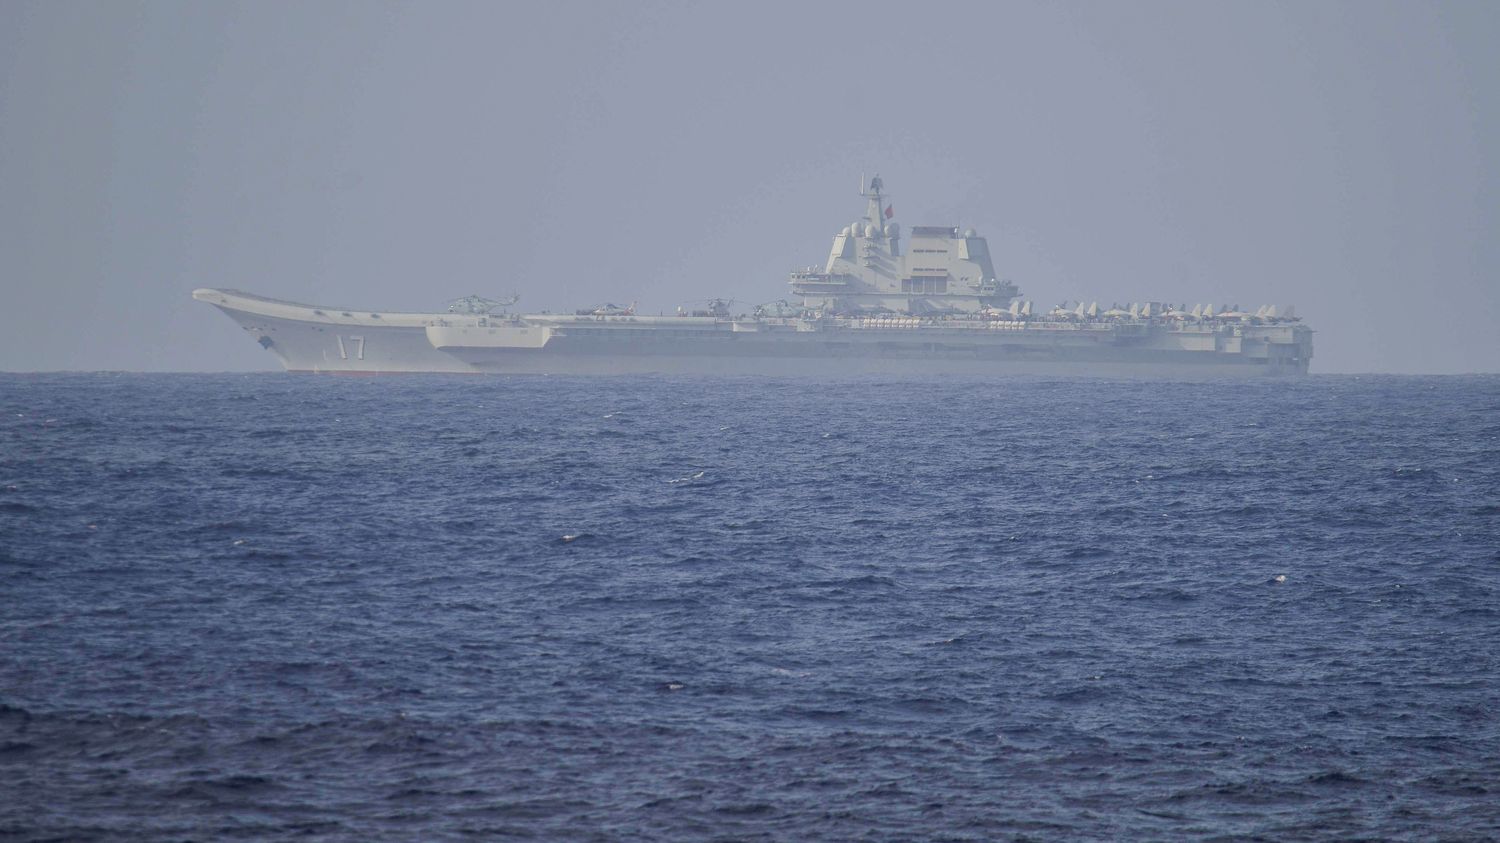 Tensions between China and Taiwan: Taipei reports the passage of a Chinese aircraft carrier near its waters
